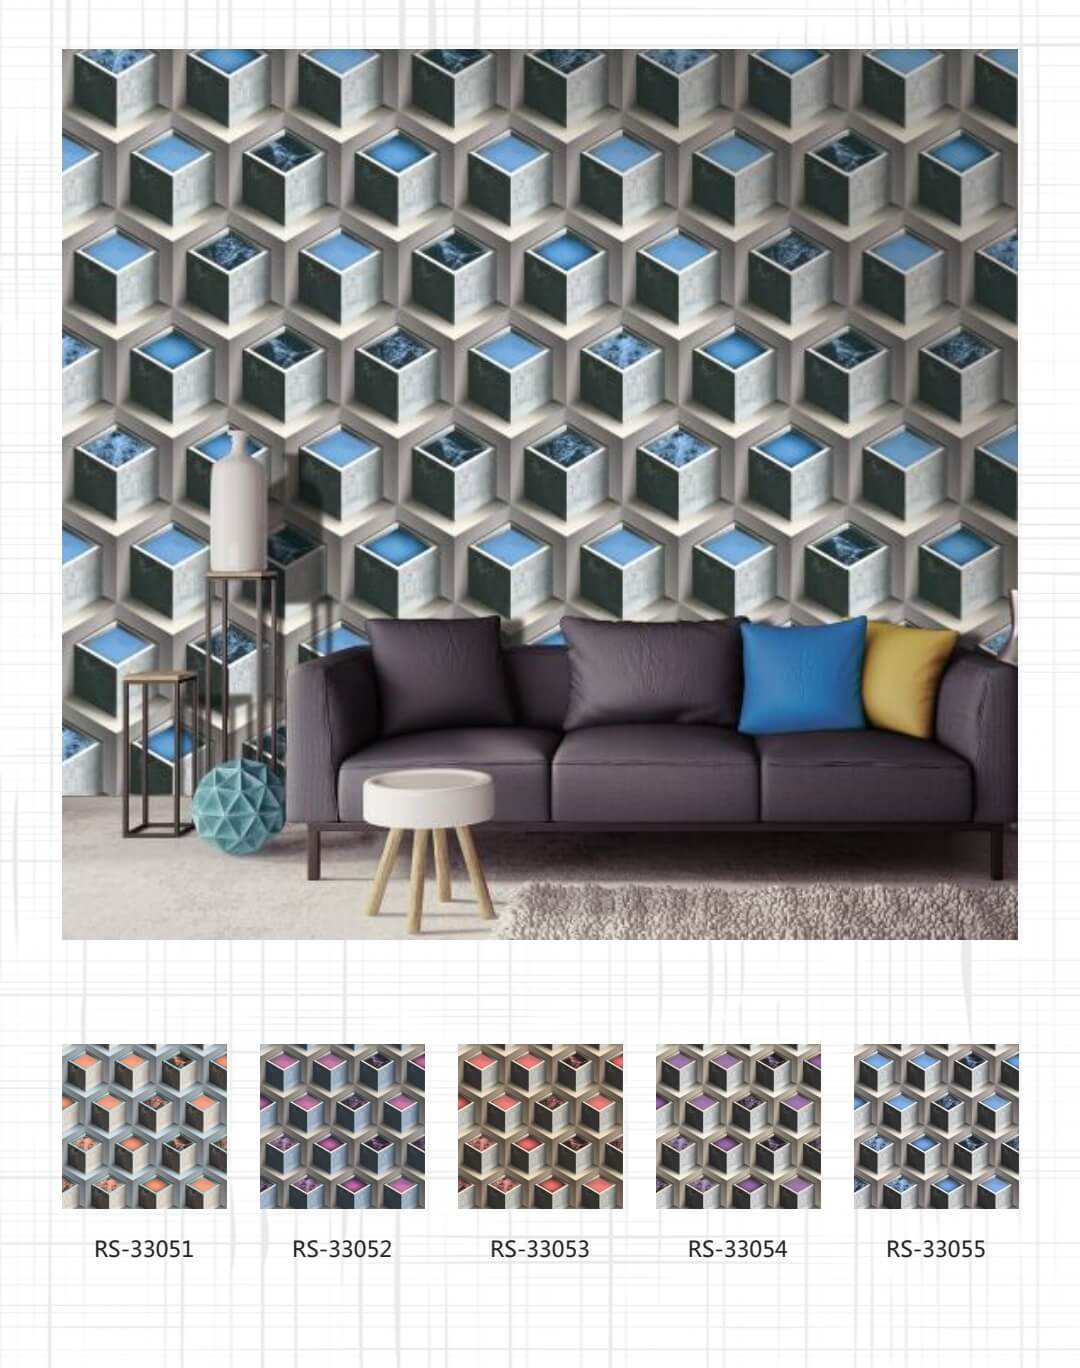 3d Effect Modern Room Wallpaper Wholesale with Stone Designs (7)